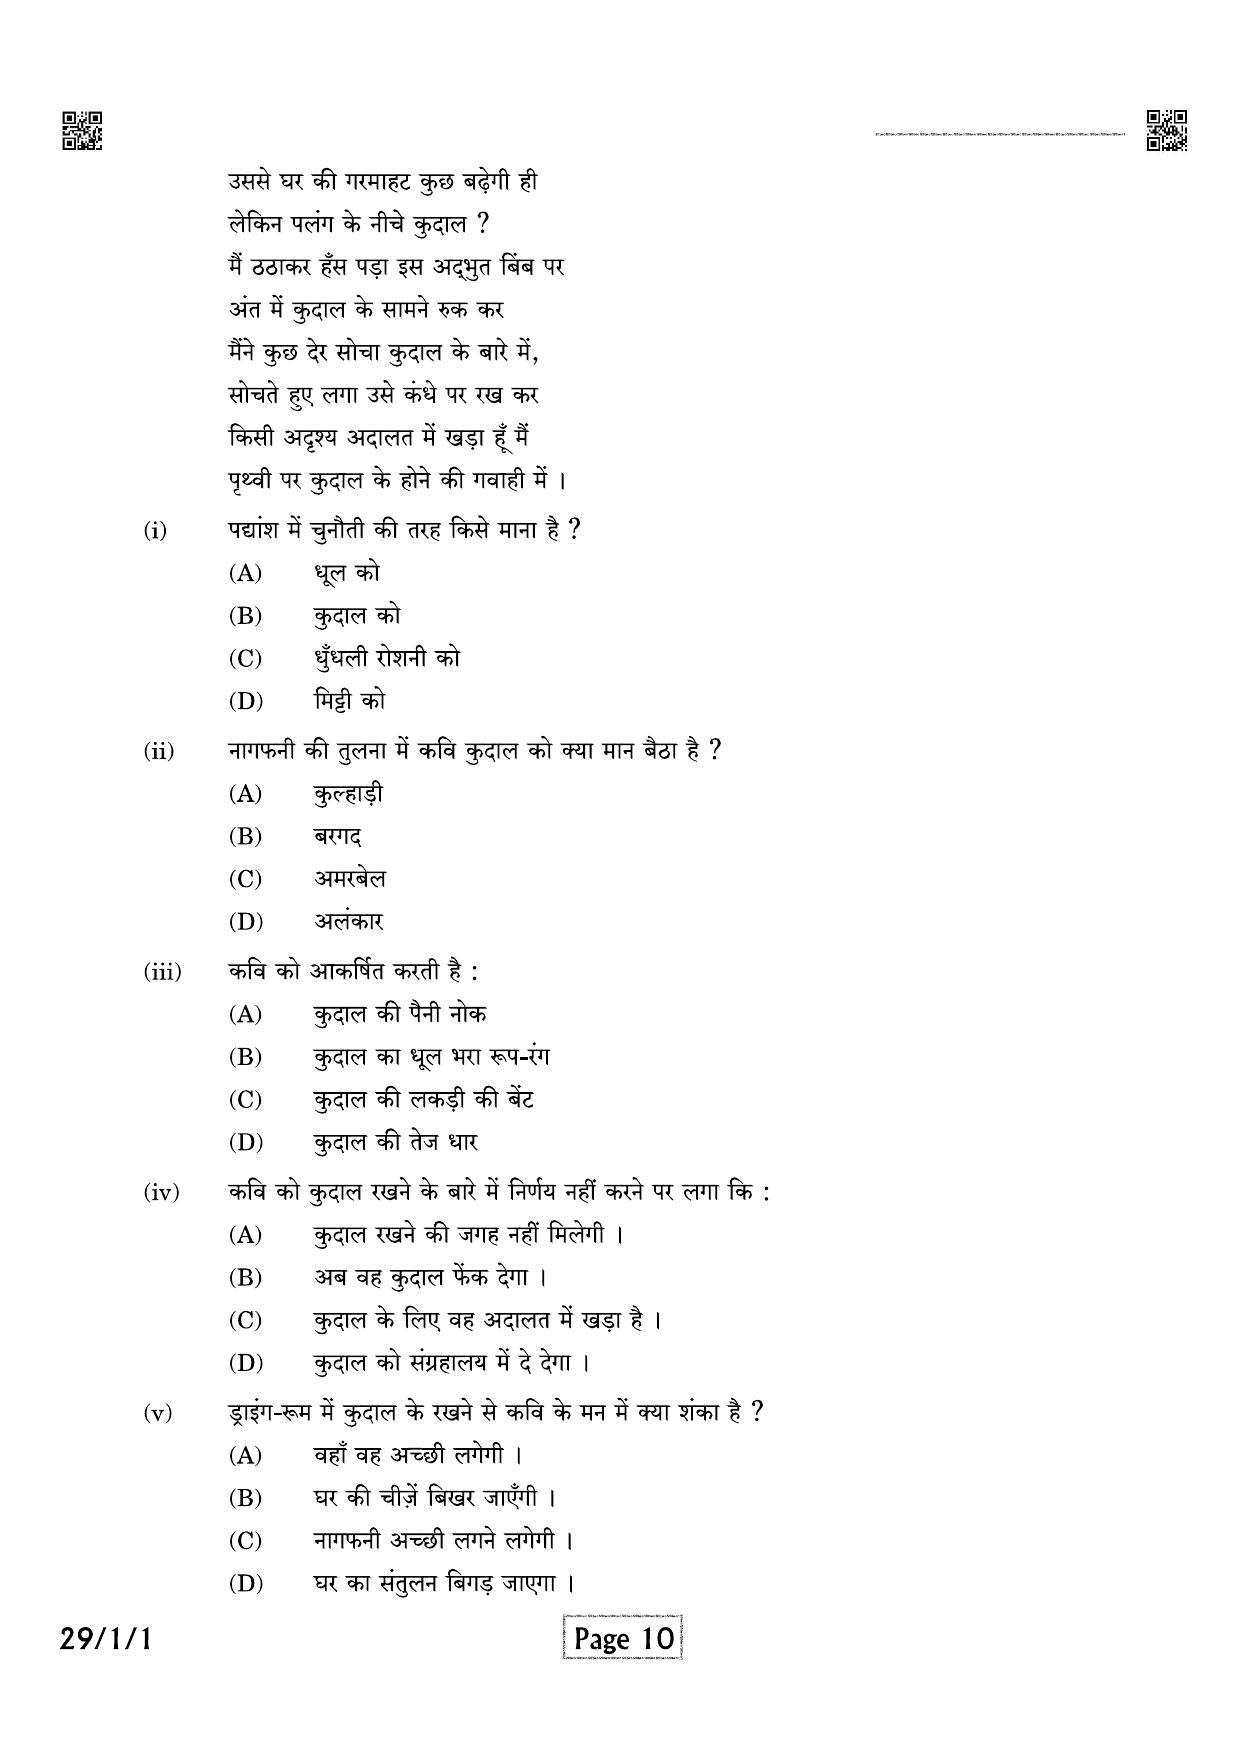 CBSE Class 12 QP_002_HINDI_ELECTIVE 2021 Compartment Question Paper - Page 10